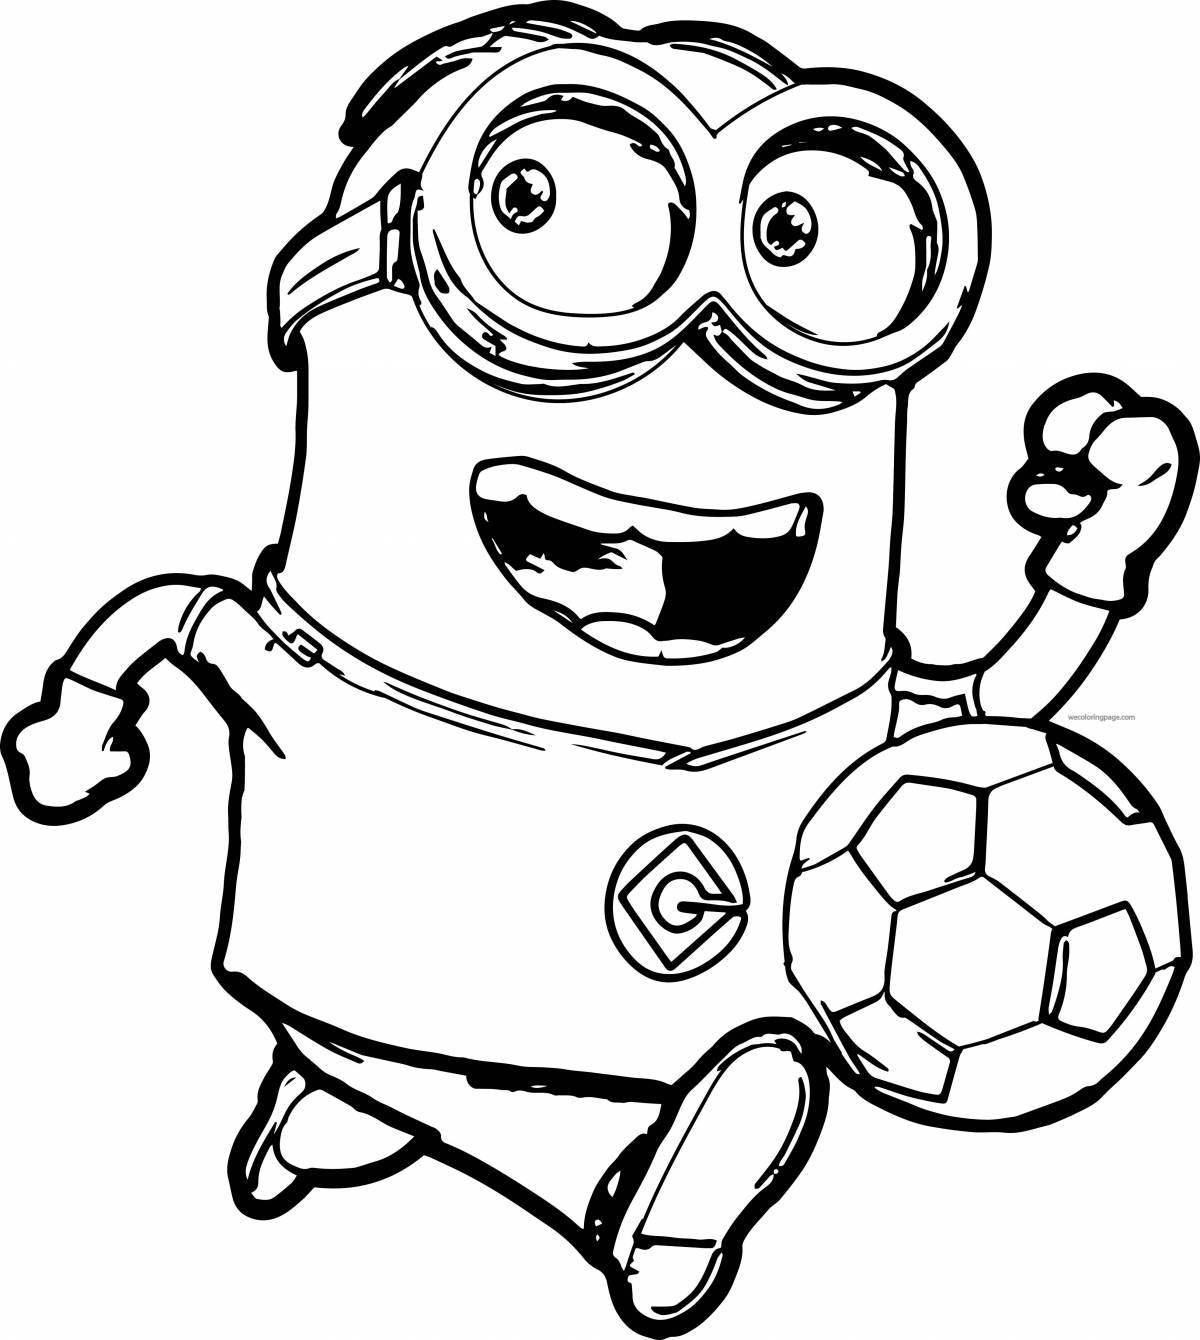 Minions themed coloring book for girls